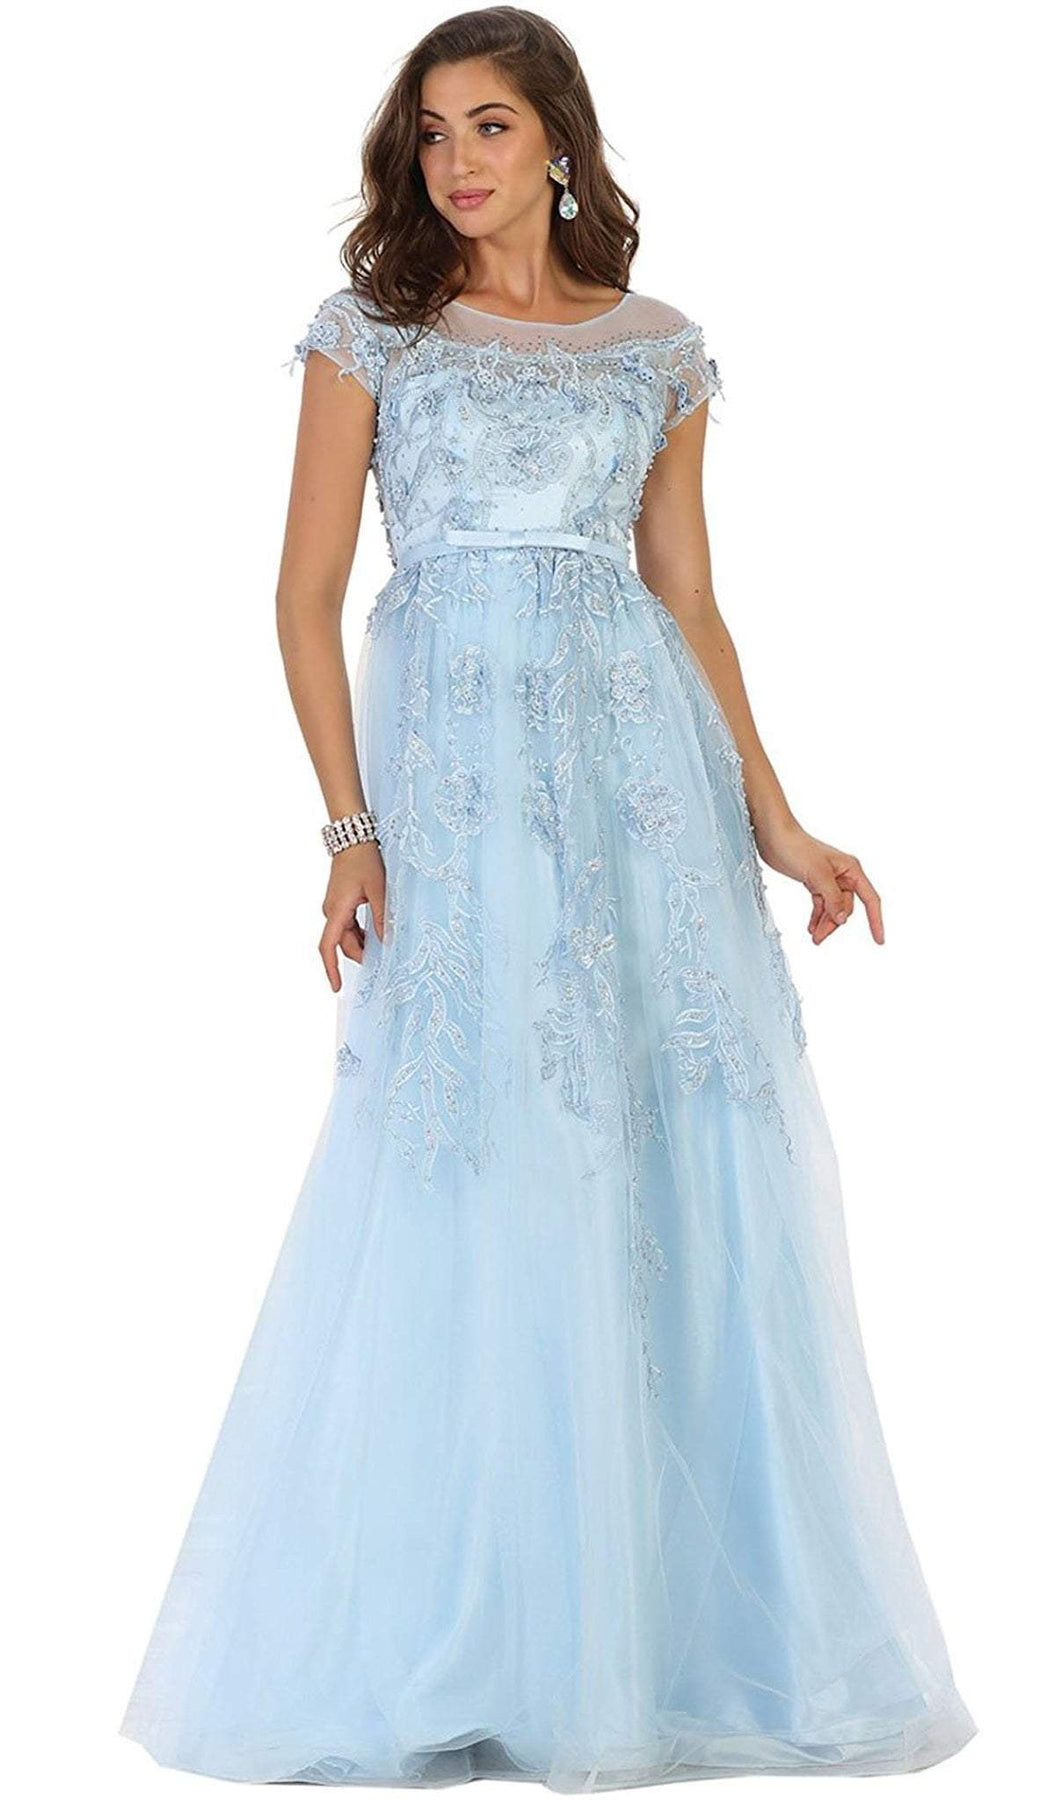 May Queen - Shimmering Illusion Scoop Neck A-line Evening Gown Special Occasion Dress 4 / Baby-Blue